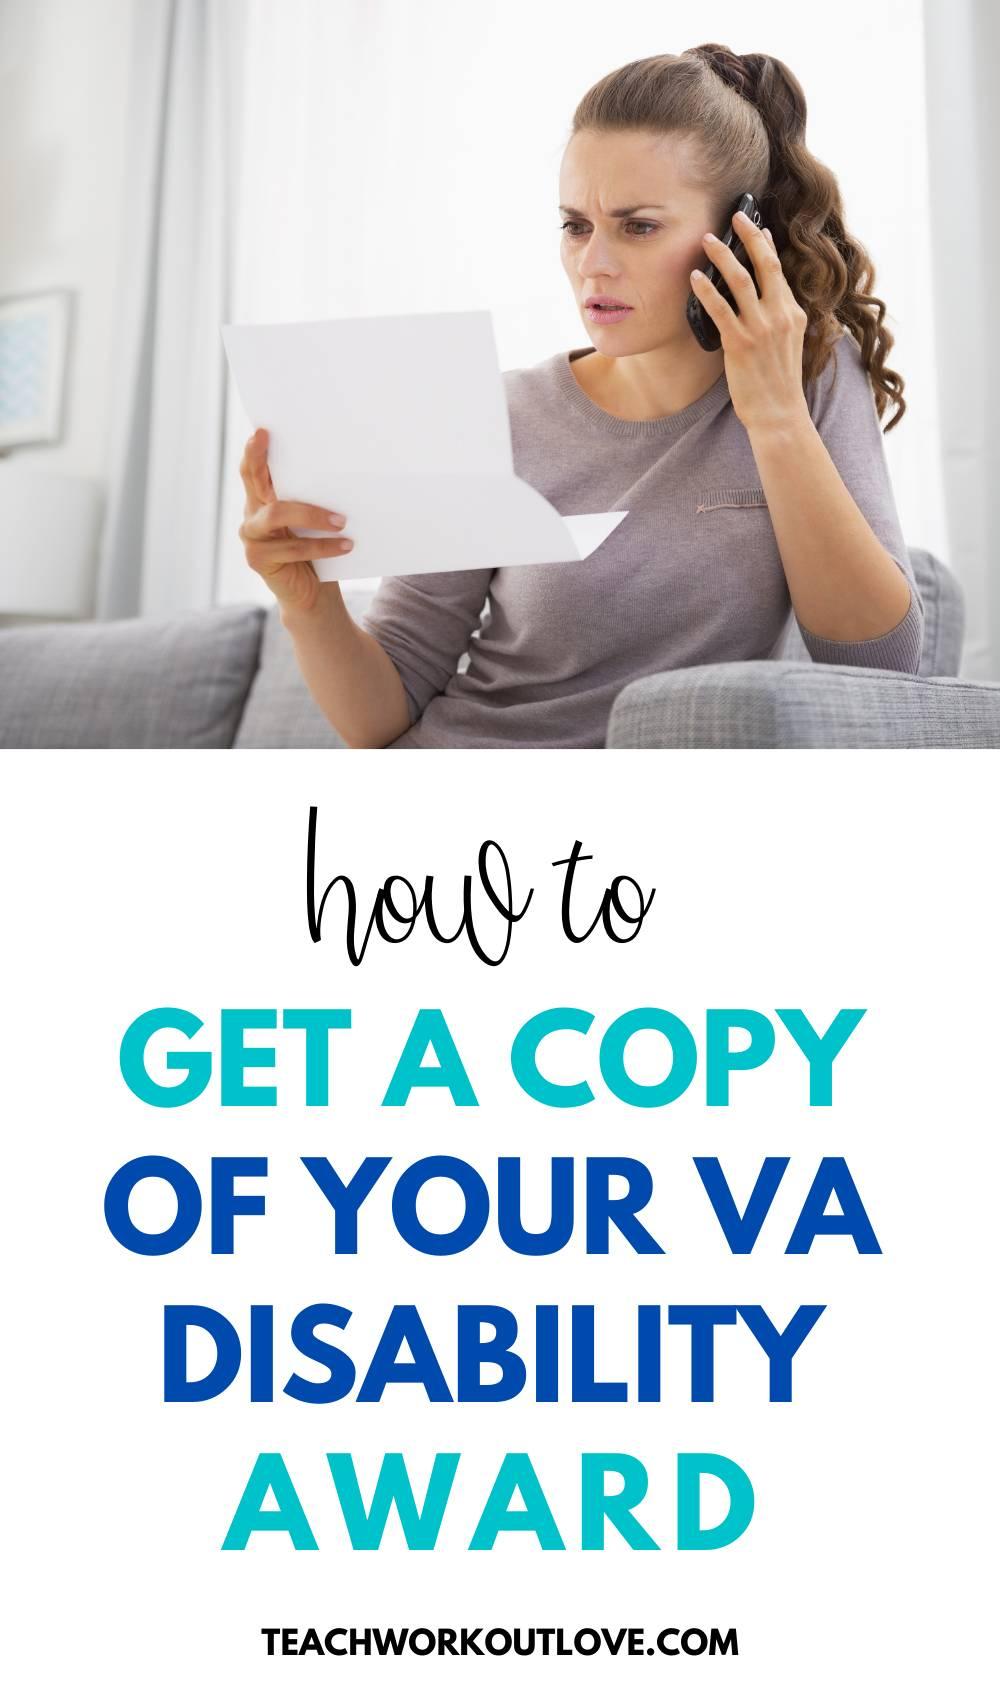 A award letter is documentation every disabled veteran should have. Many vets don't have a copy. Read on for process of retrieving your award letter.